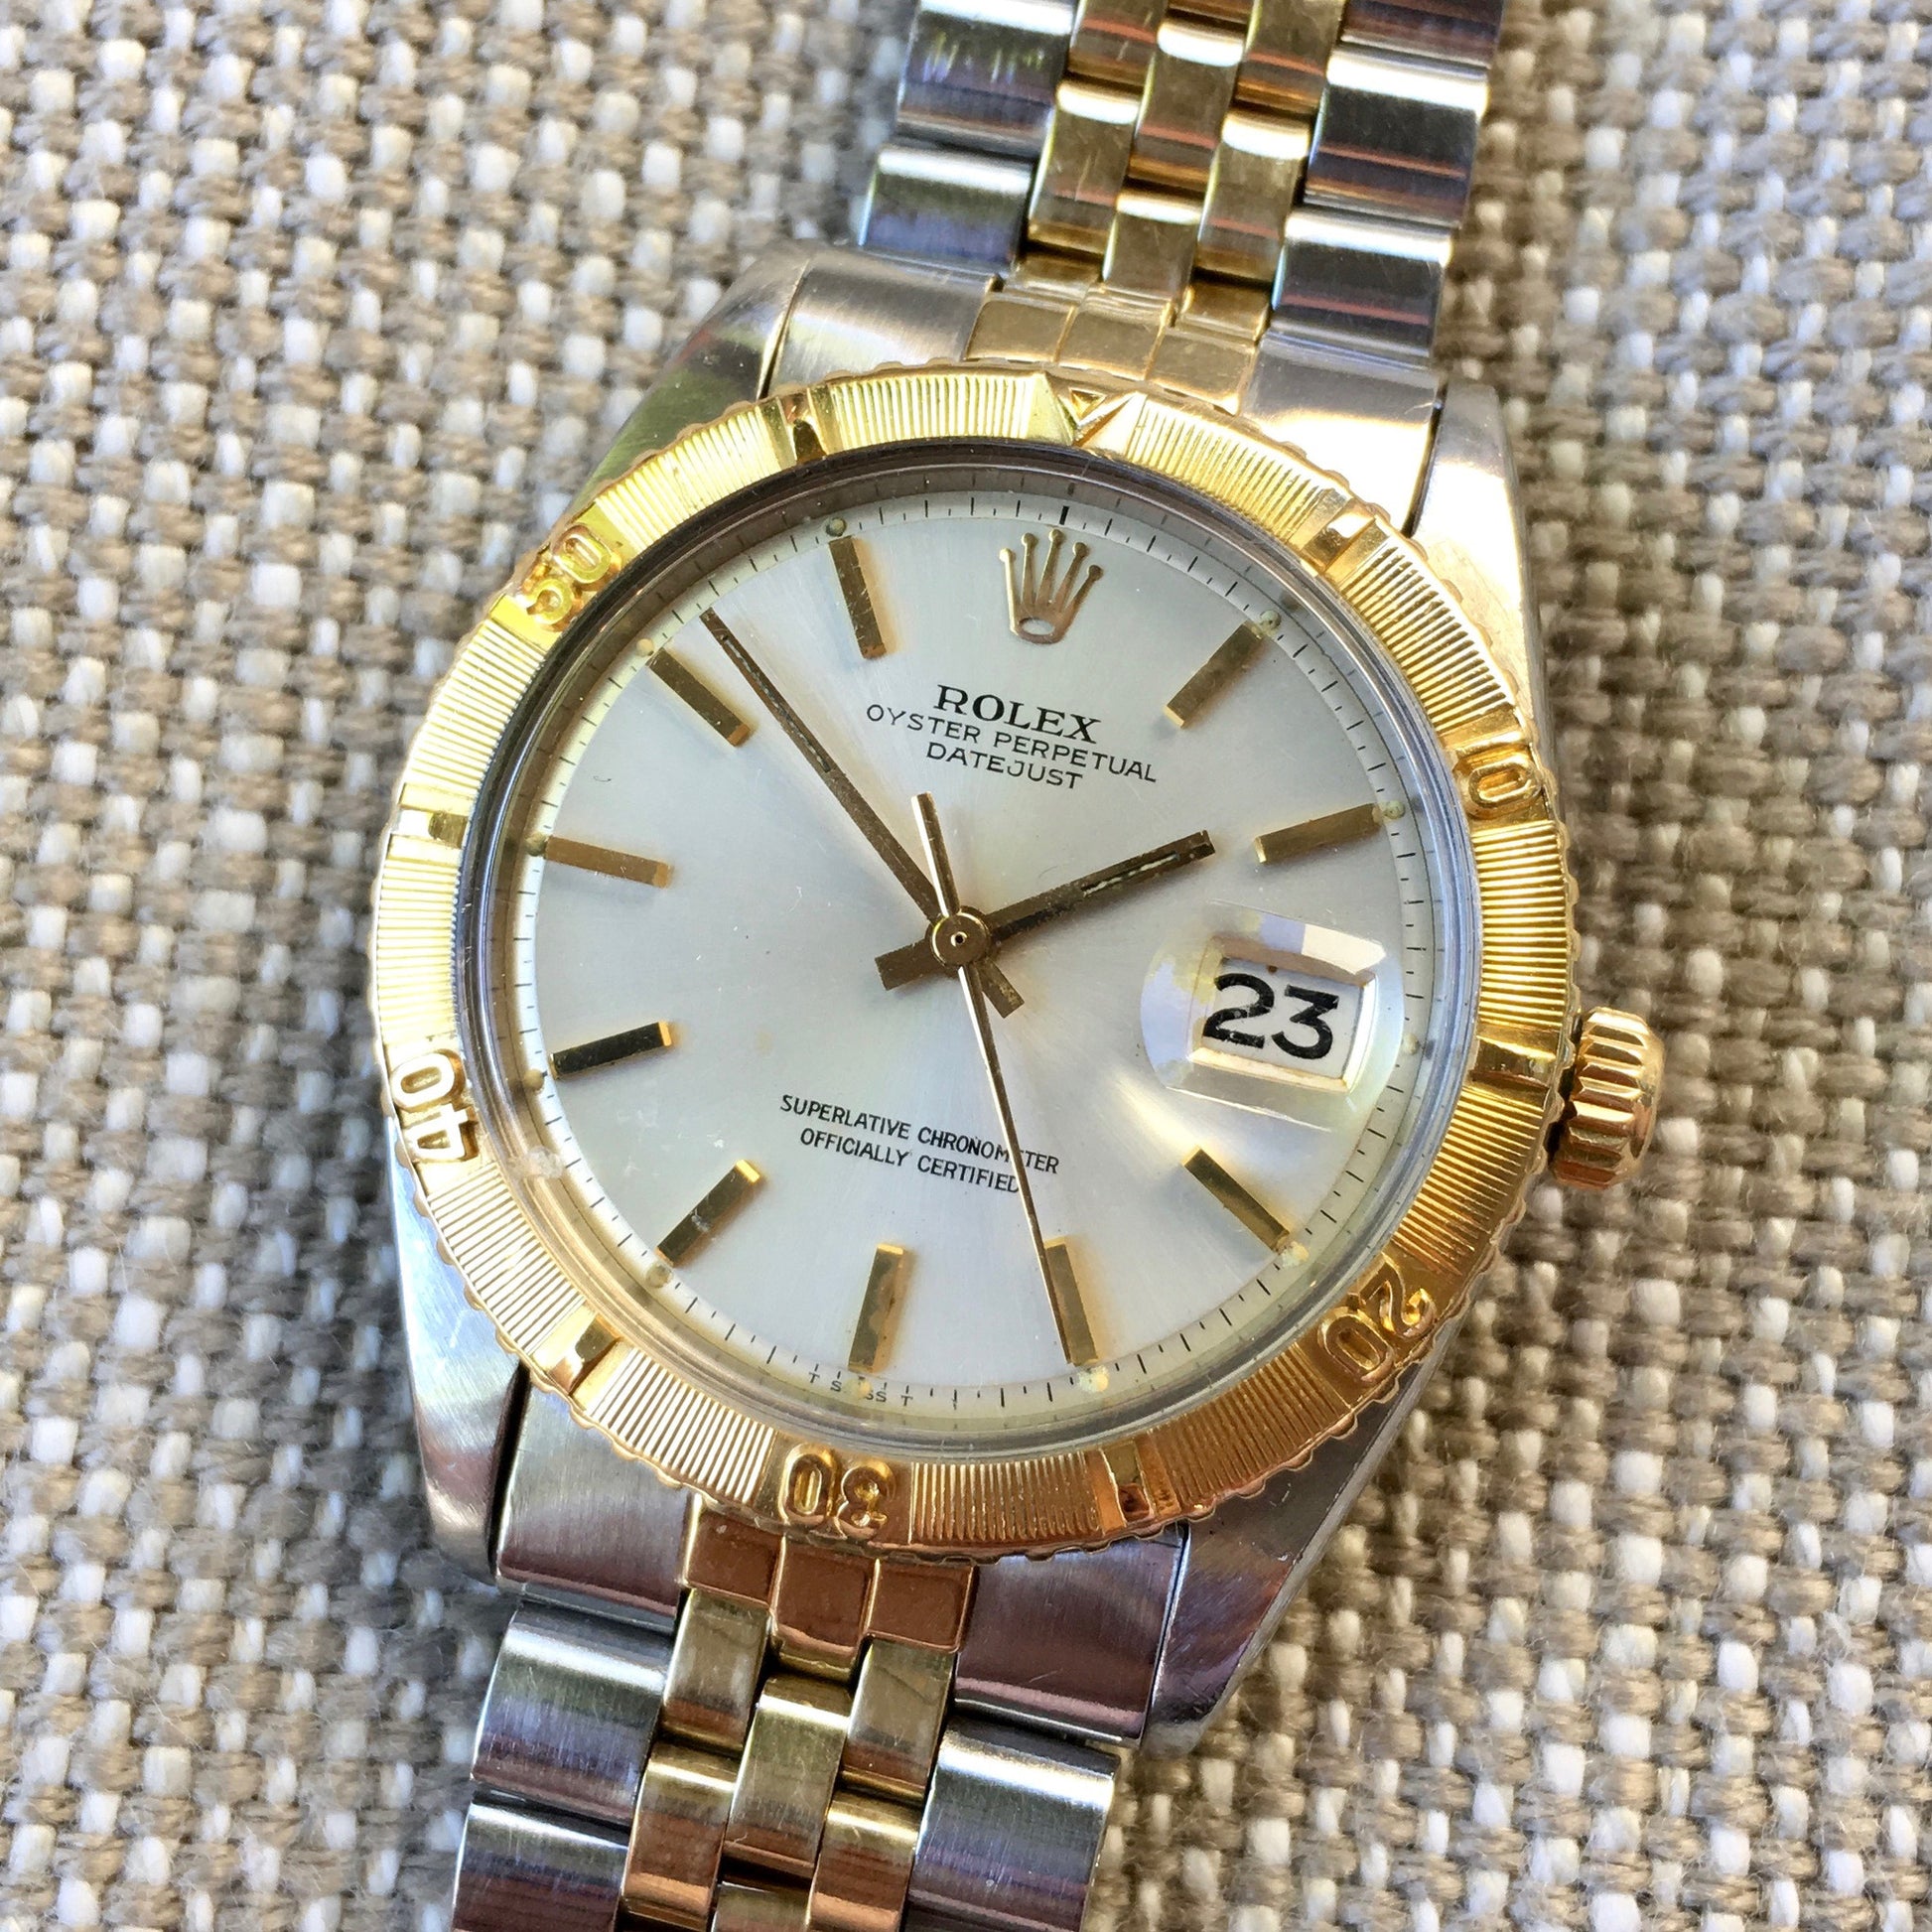 Vintage Rolex Thunderbird Datejust 1625 Two Tone 14K Steel 1968 Cal. 1570 Jubilee Watch - Hashtag Watch Company